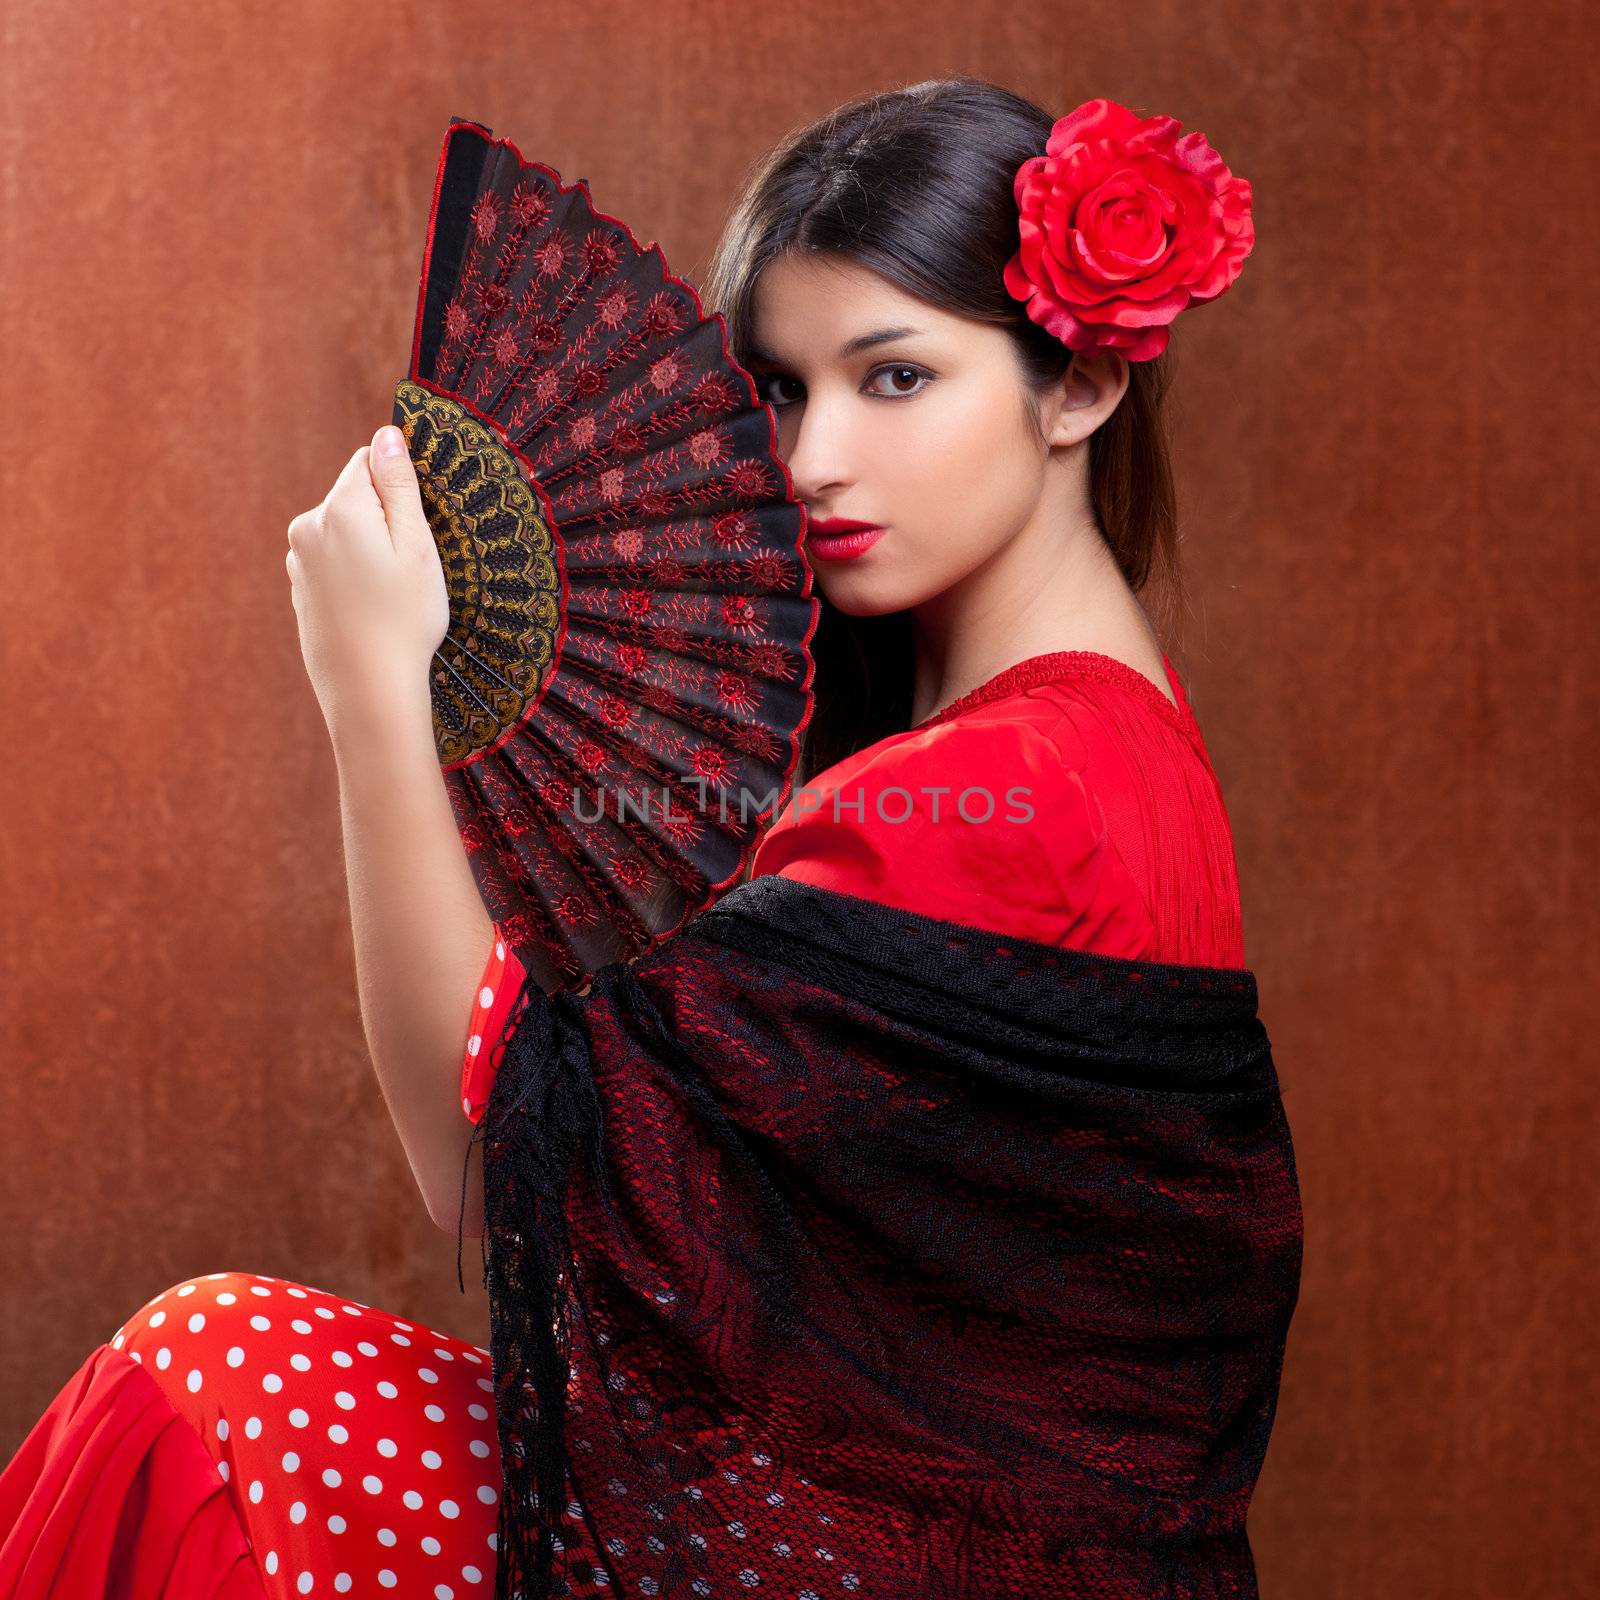 Gipsy flamenco dancer Spain girl with red rose and spanish hand fan